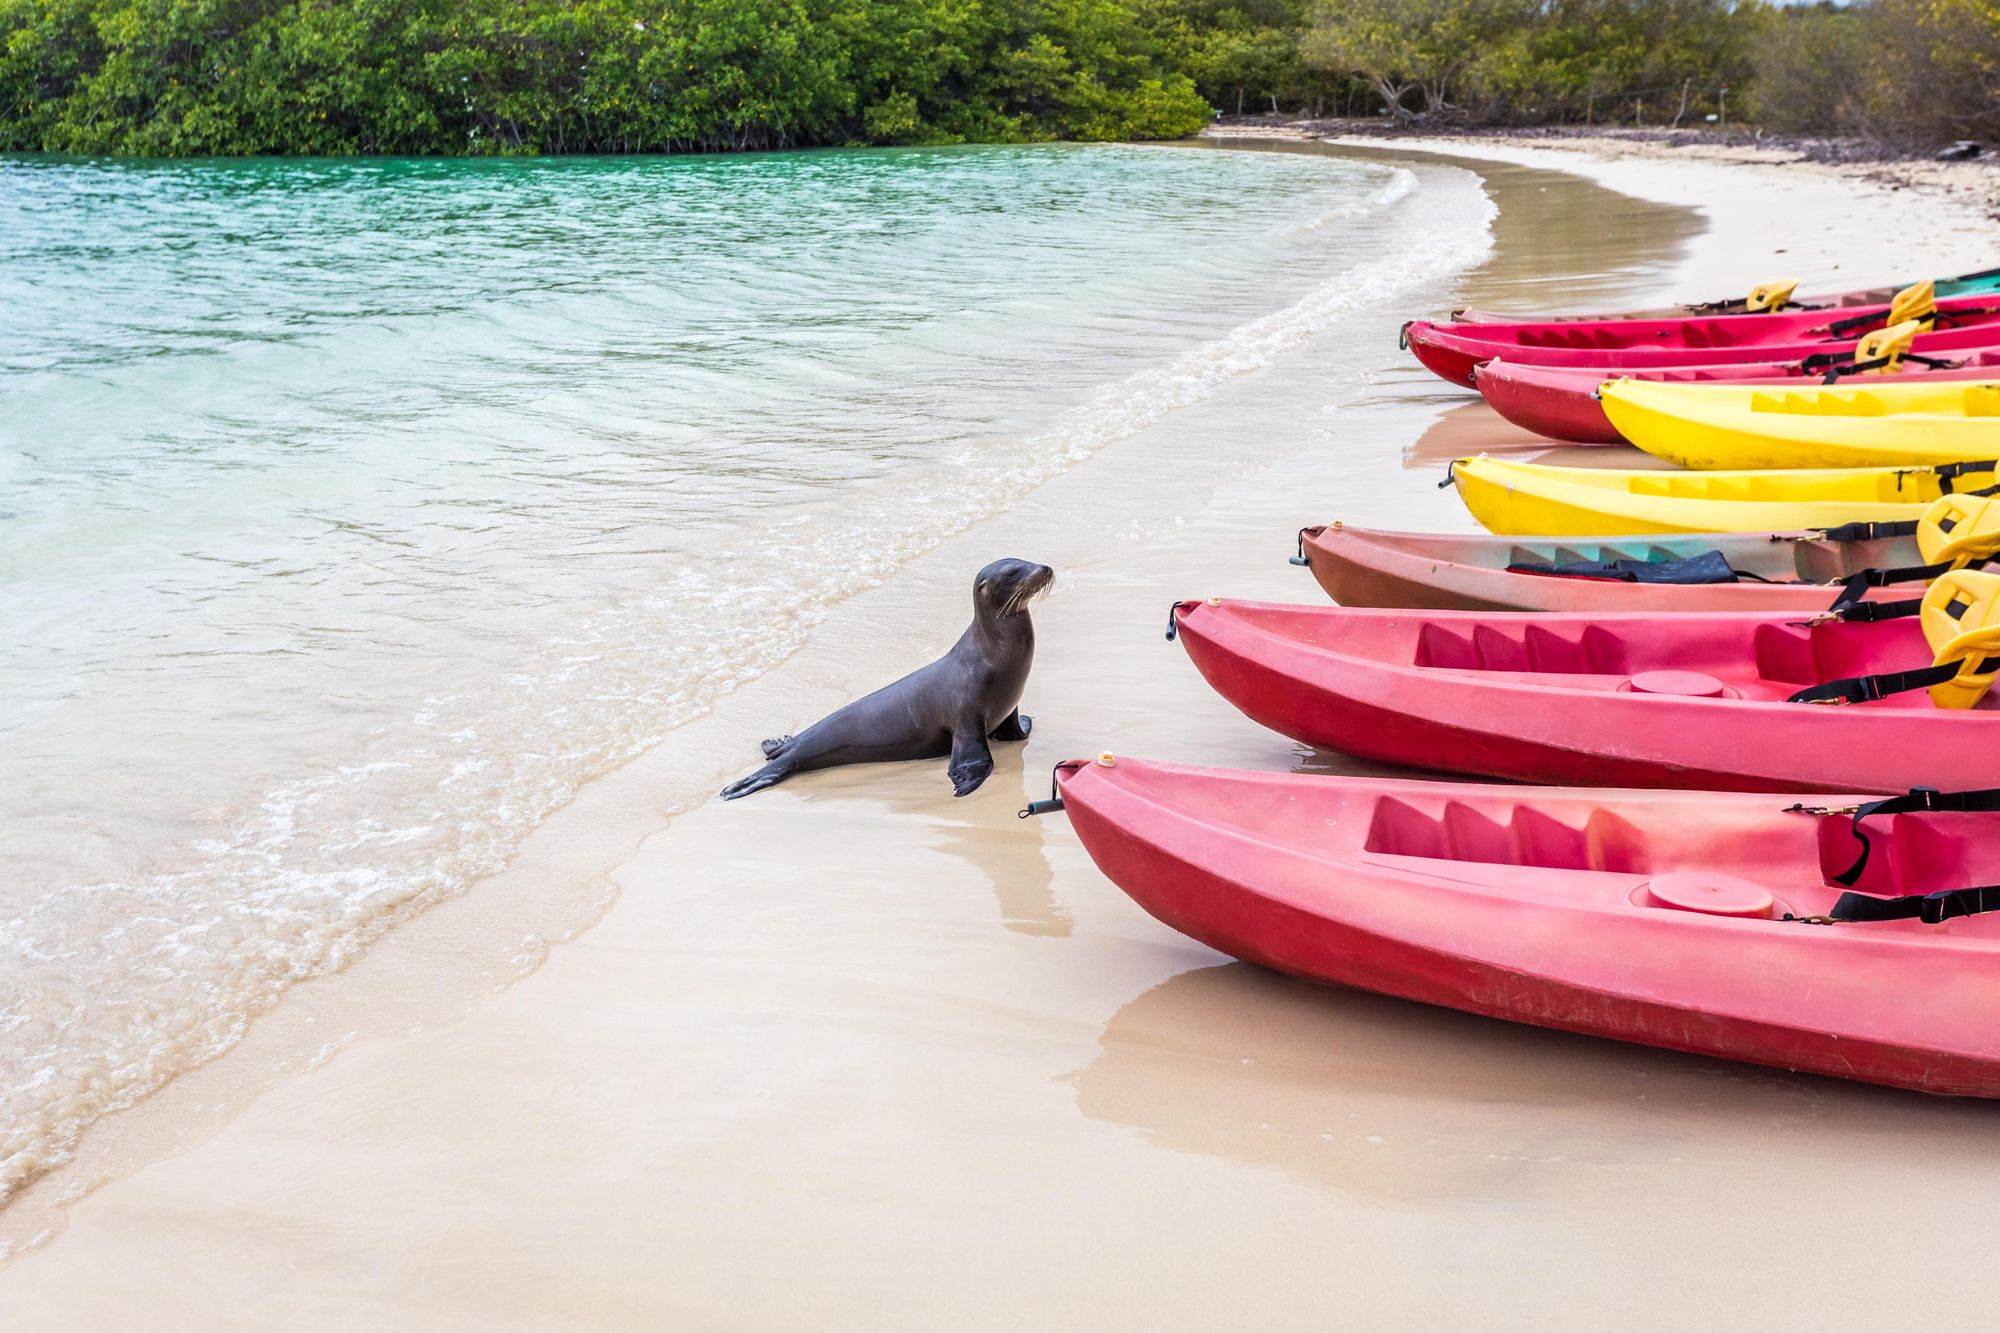 A sea lion gets curious around a line up of kayaks on the white sand beach. Photo: Getty